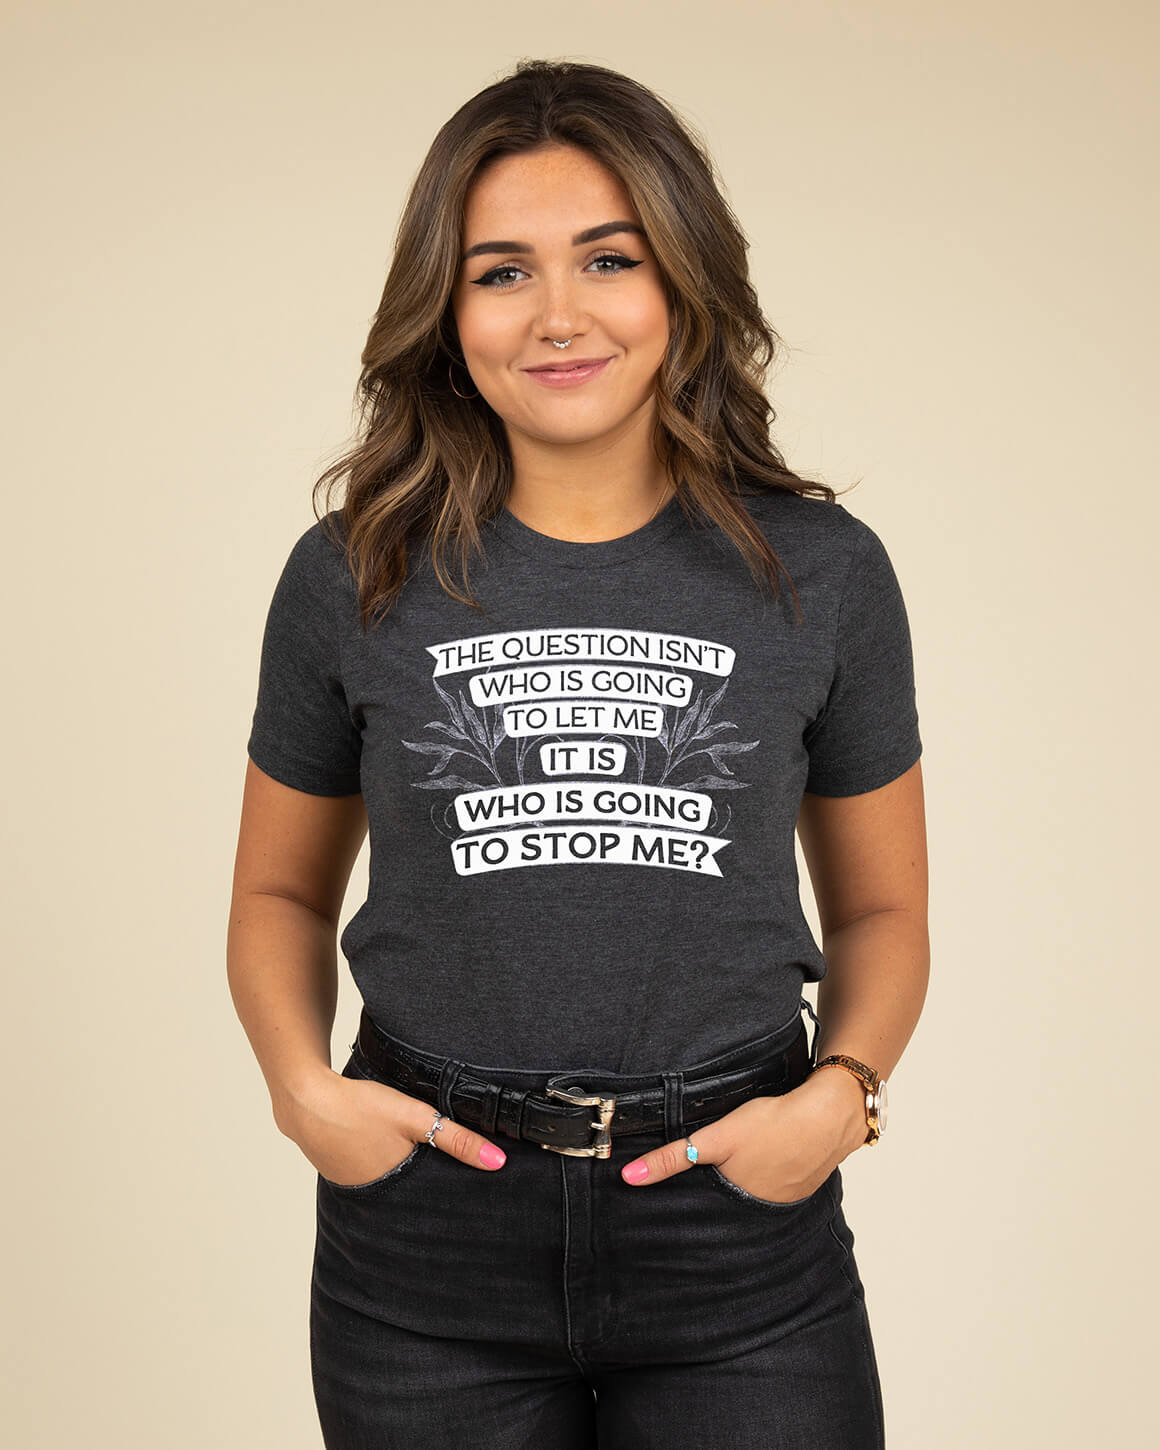 smiling woman in inspiring feminist t-shirt with white print